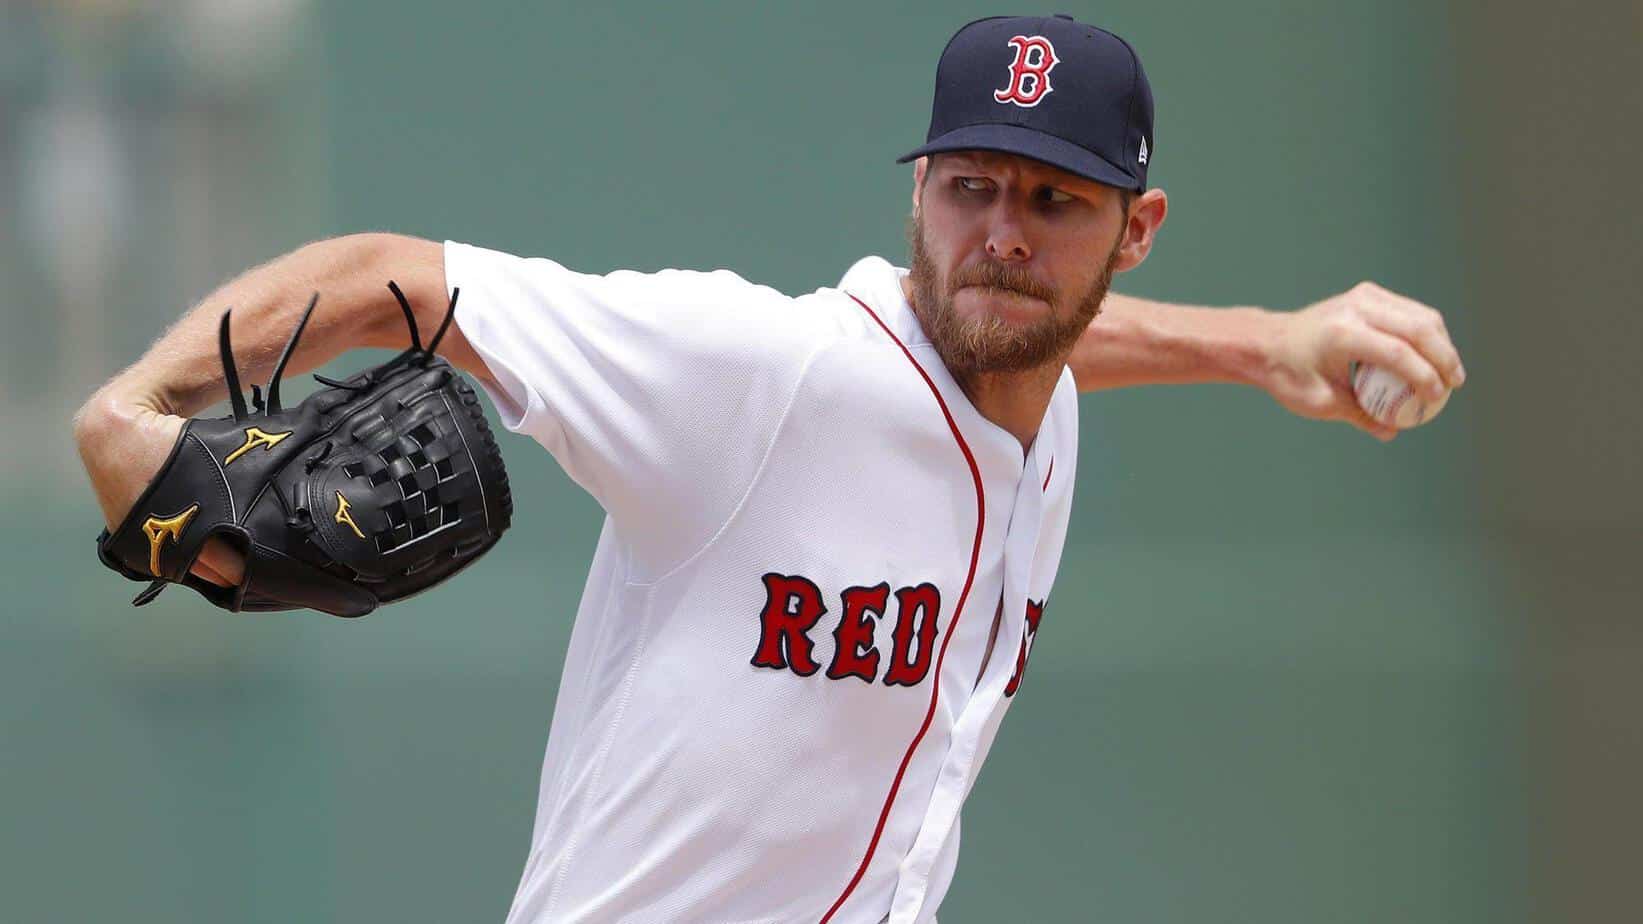 Adam Scherer and Your Pal Emac's MLB DFS Podcast discussing the August 13 slate for DraftKings, FanDuel and Yahoo with thoughts on Chris Sale